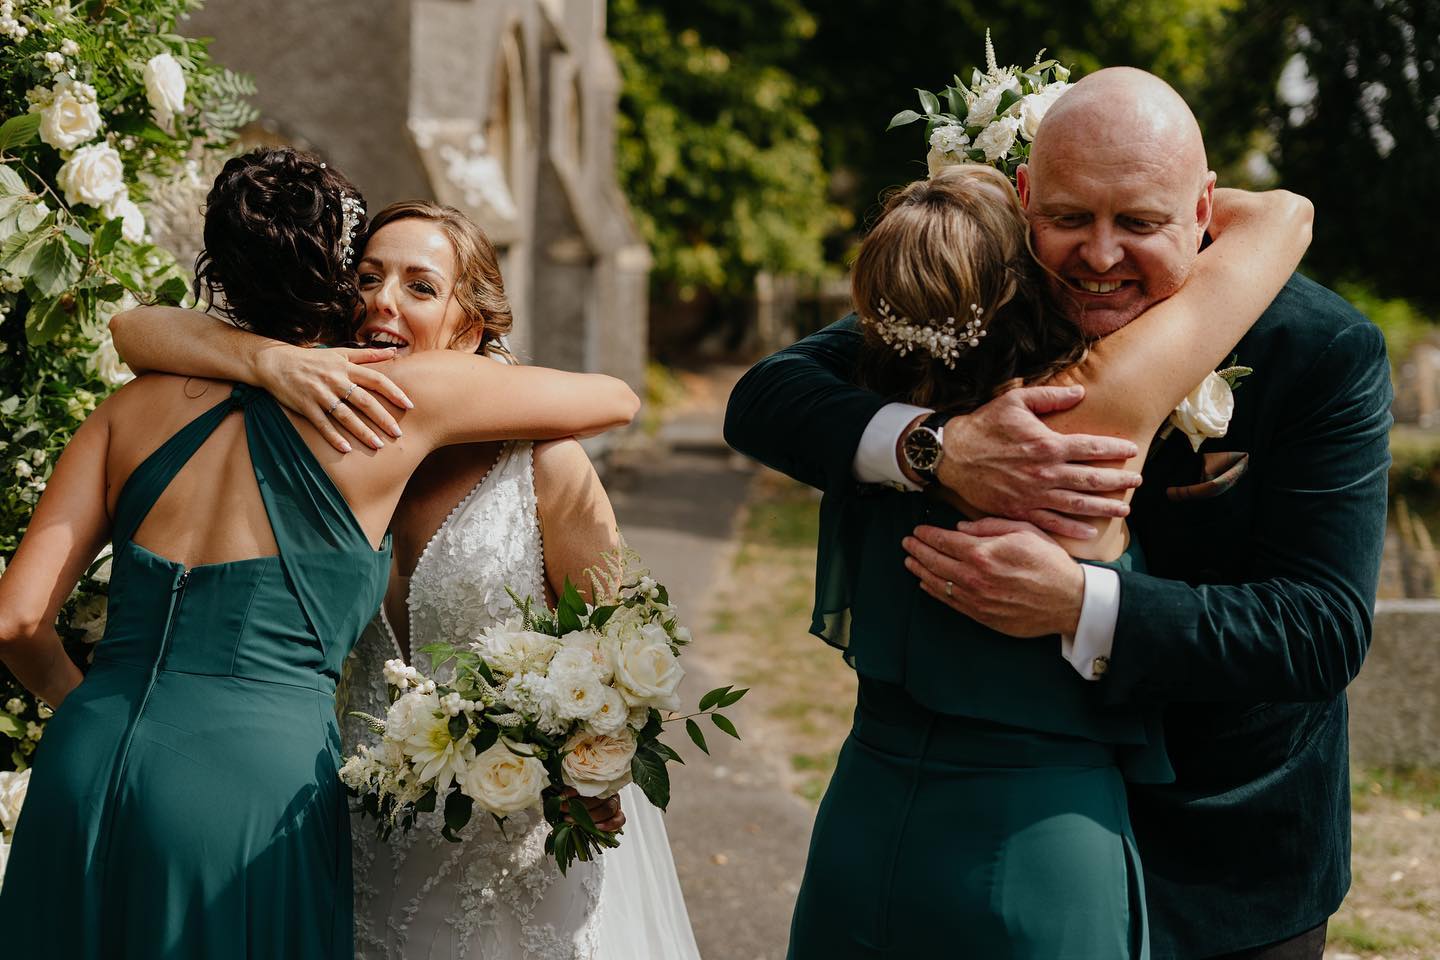 Hugs all round, strange to imagine a wedding now without hugs!